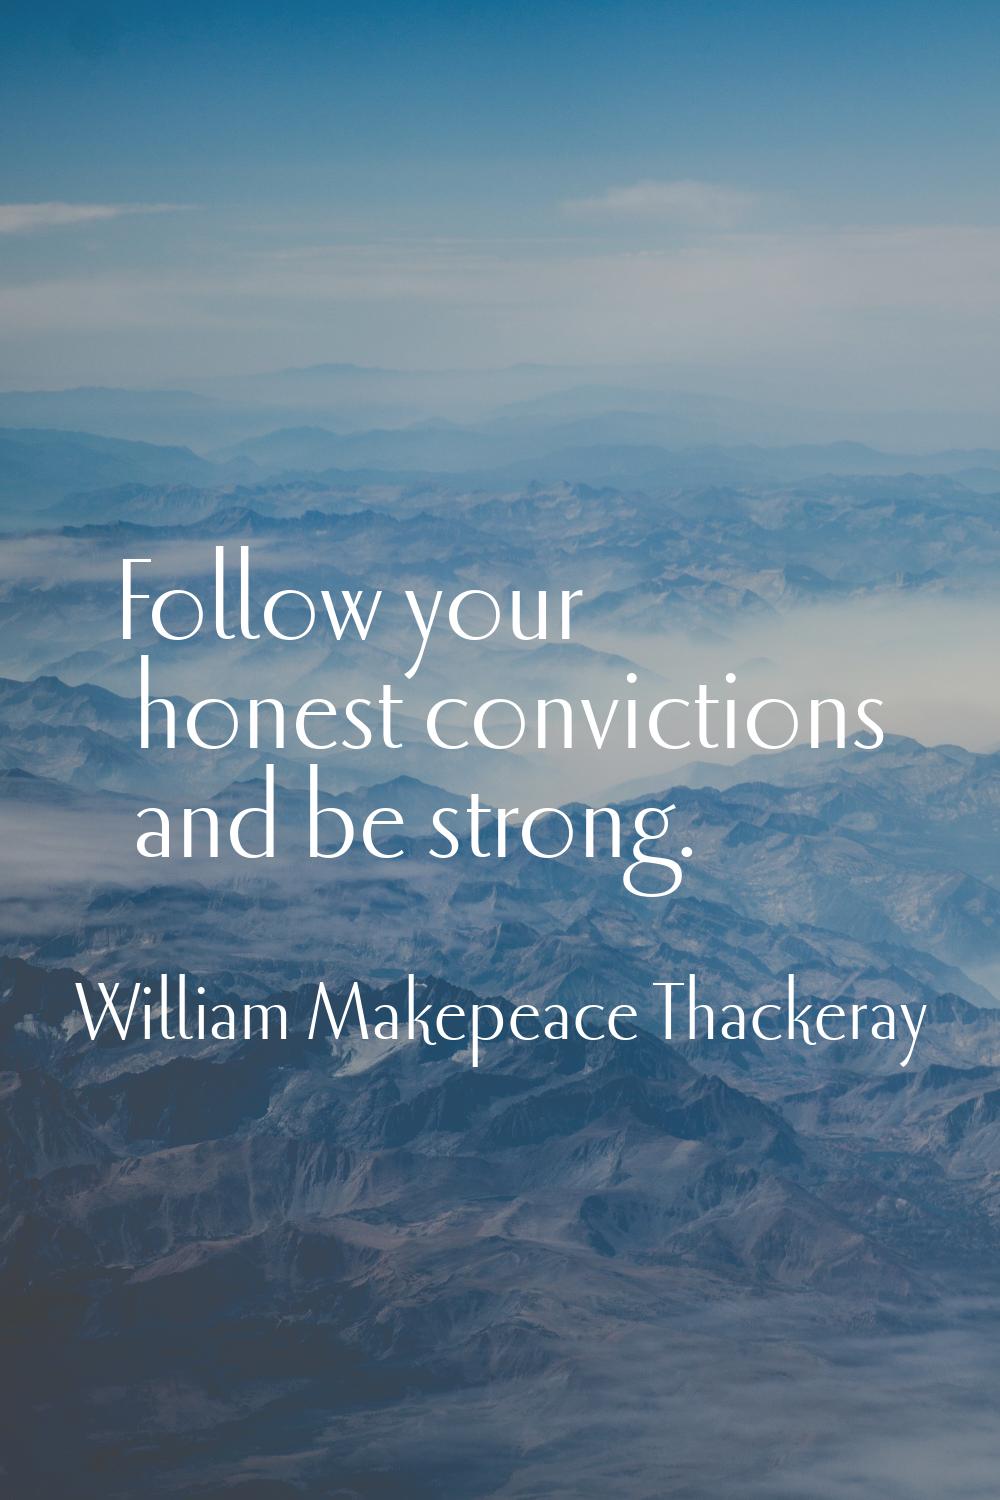 Follow your honest convictions and be strong.